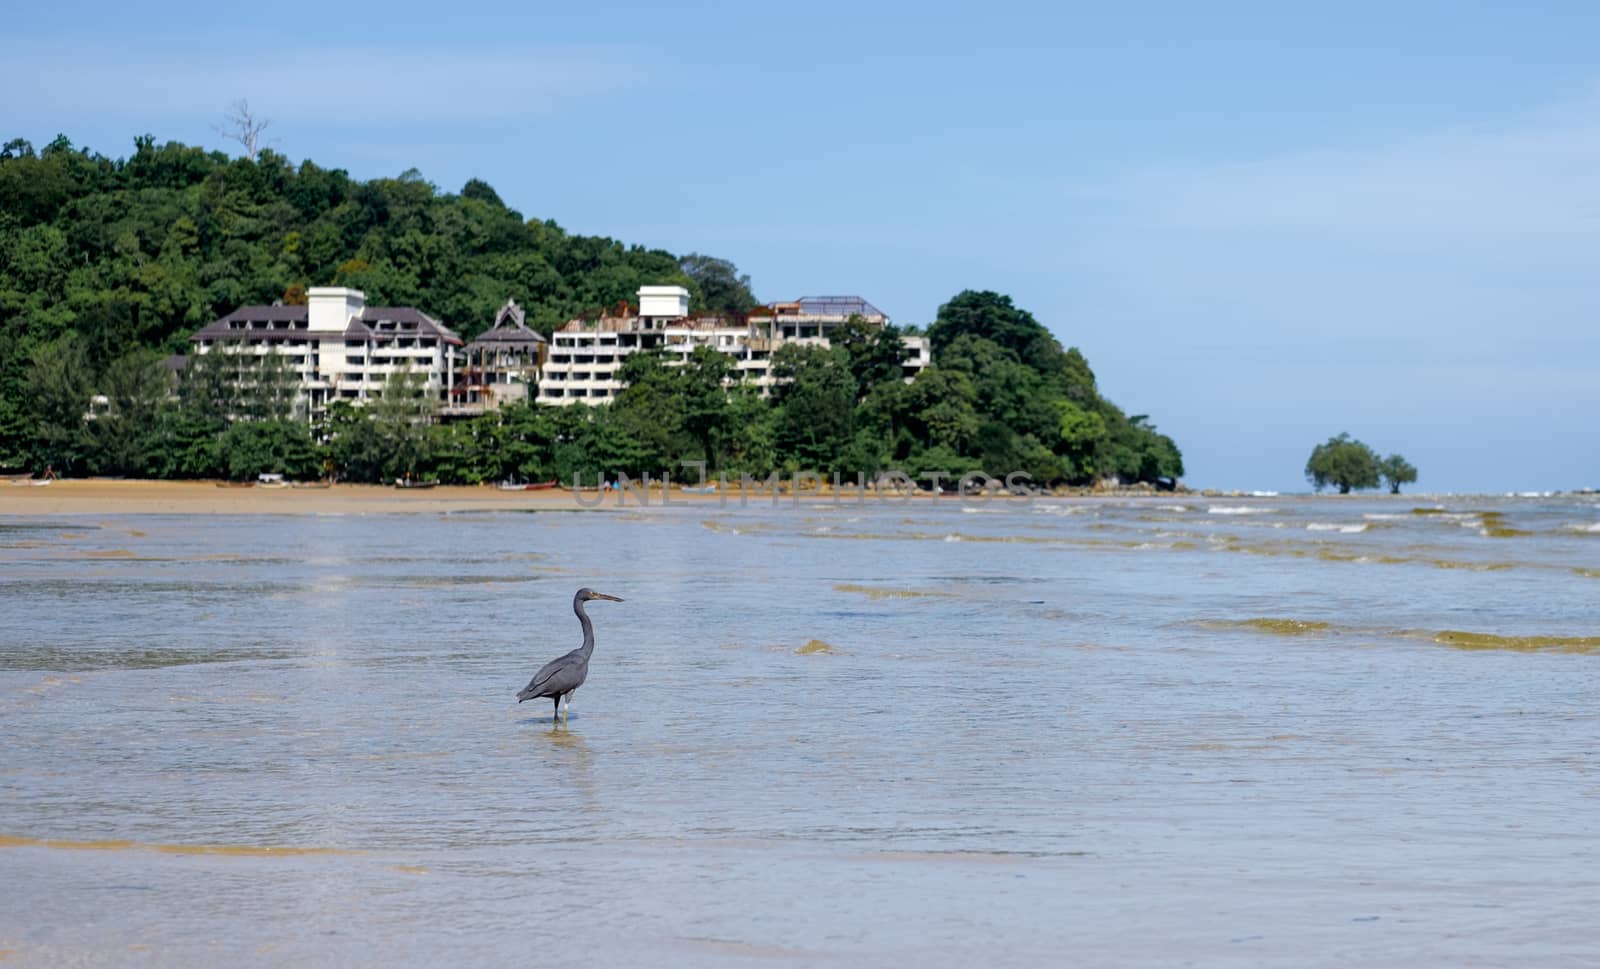 Black heron in the sea waves. Abandoned hotel in the background. by rainfallsup